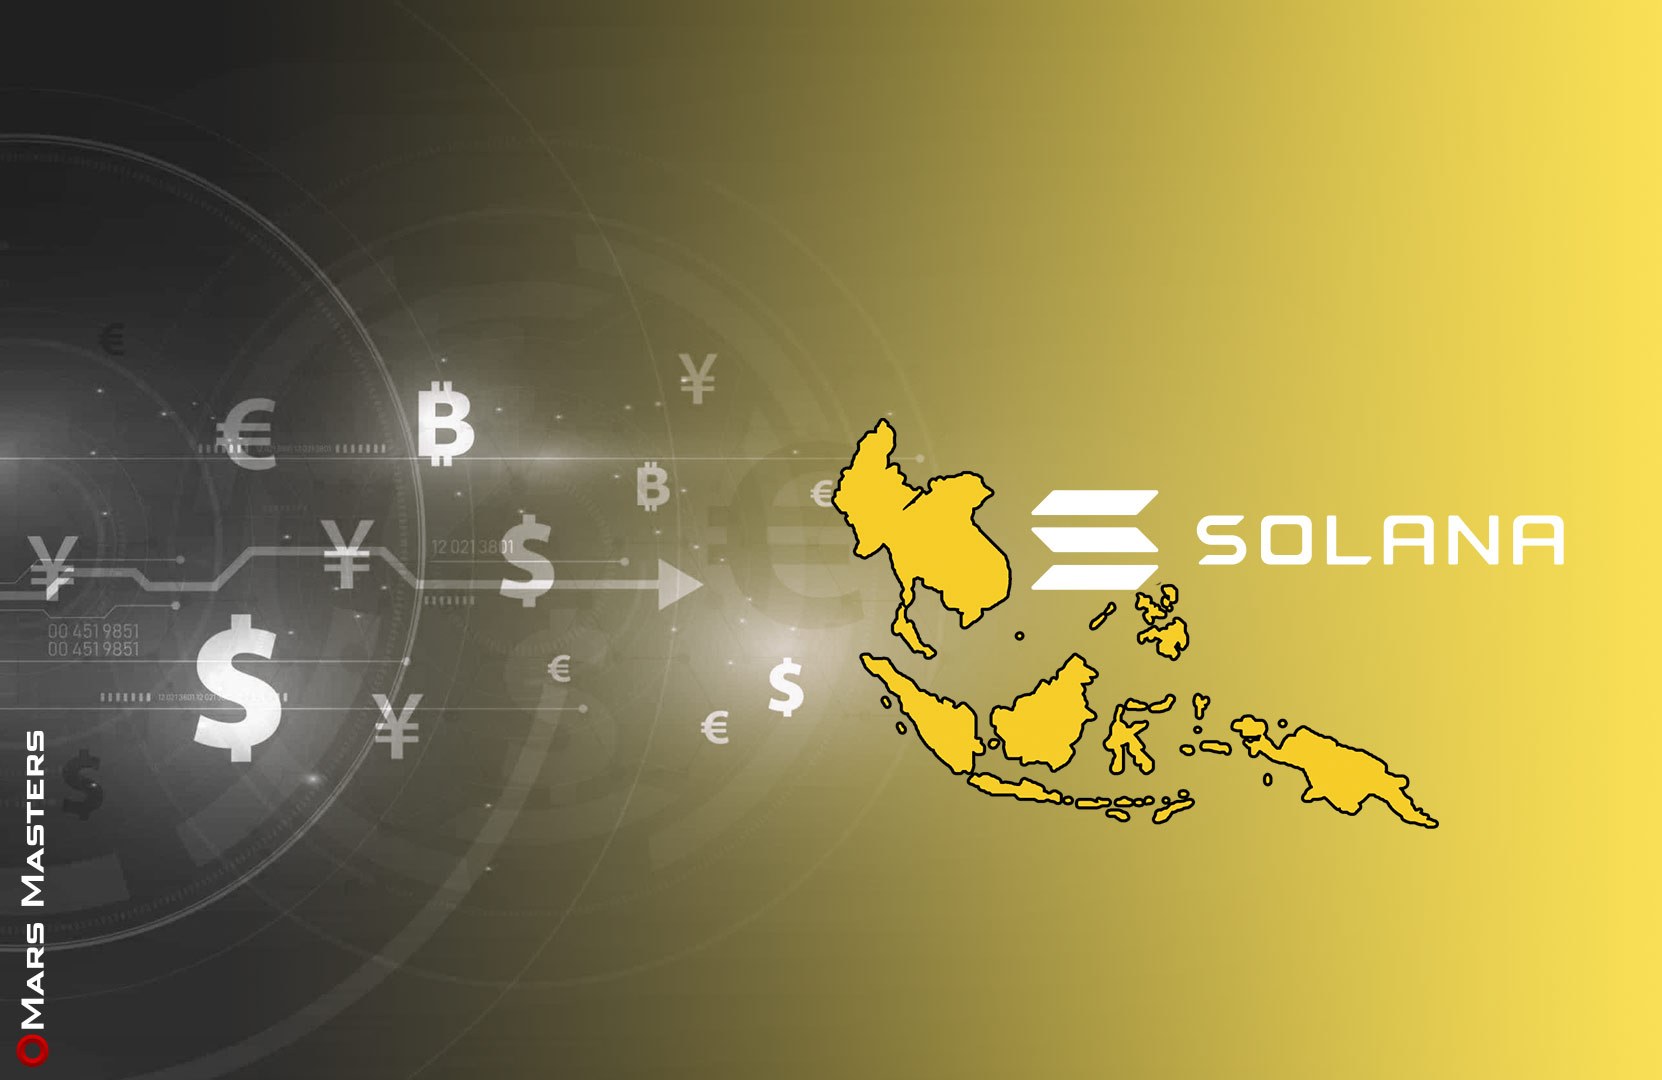 https://cointelegraph.com/news/solana-targets-growth-in-southeast-asia-with-a-5m-grants-scheme